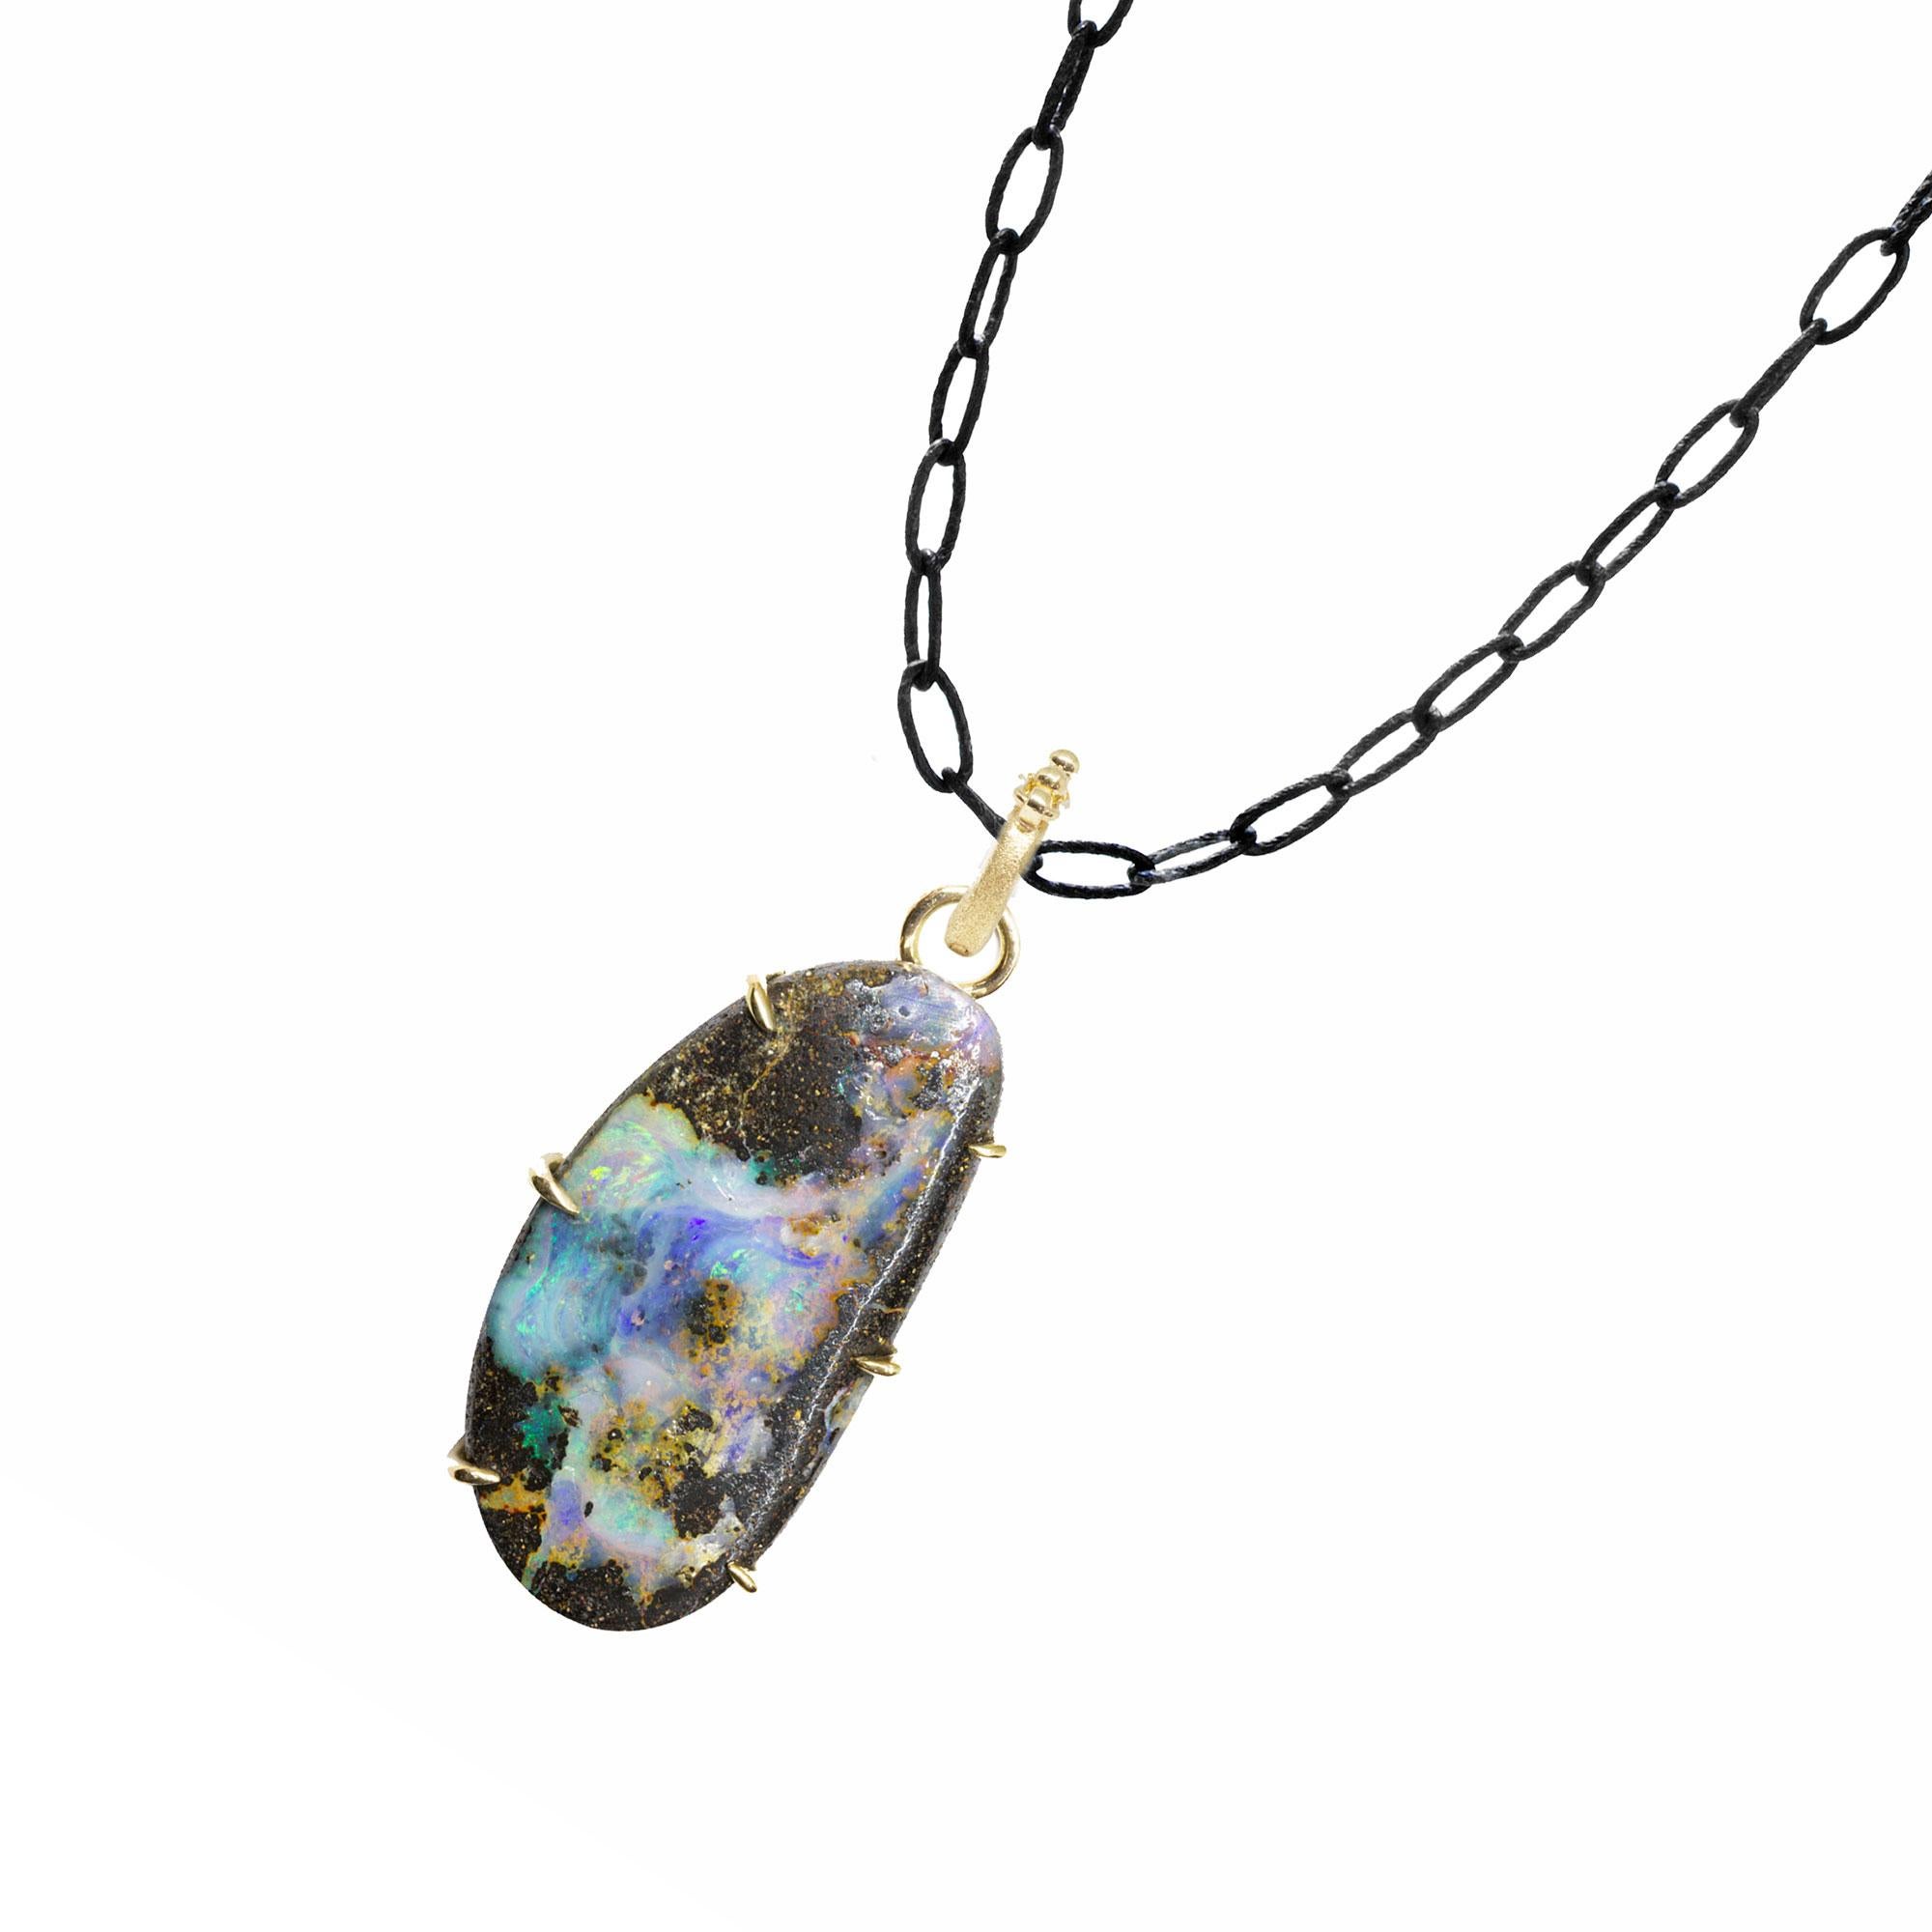 The black oxidized sterling silver neckalace chain is the perfect fit to showcase the vibrant pinnacle boulder opal pendant, the Pinnacle Medium Boulder Opal Silver Necklace is bold and brilliant, a gorgeous style you can dress up or down on the